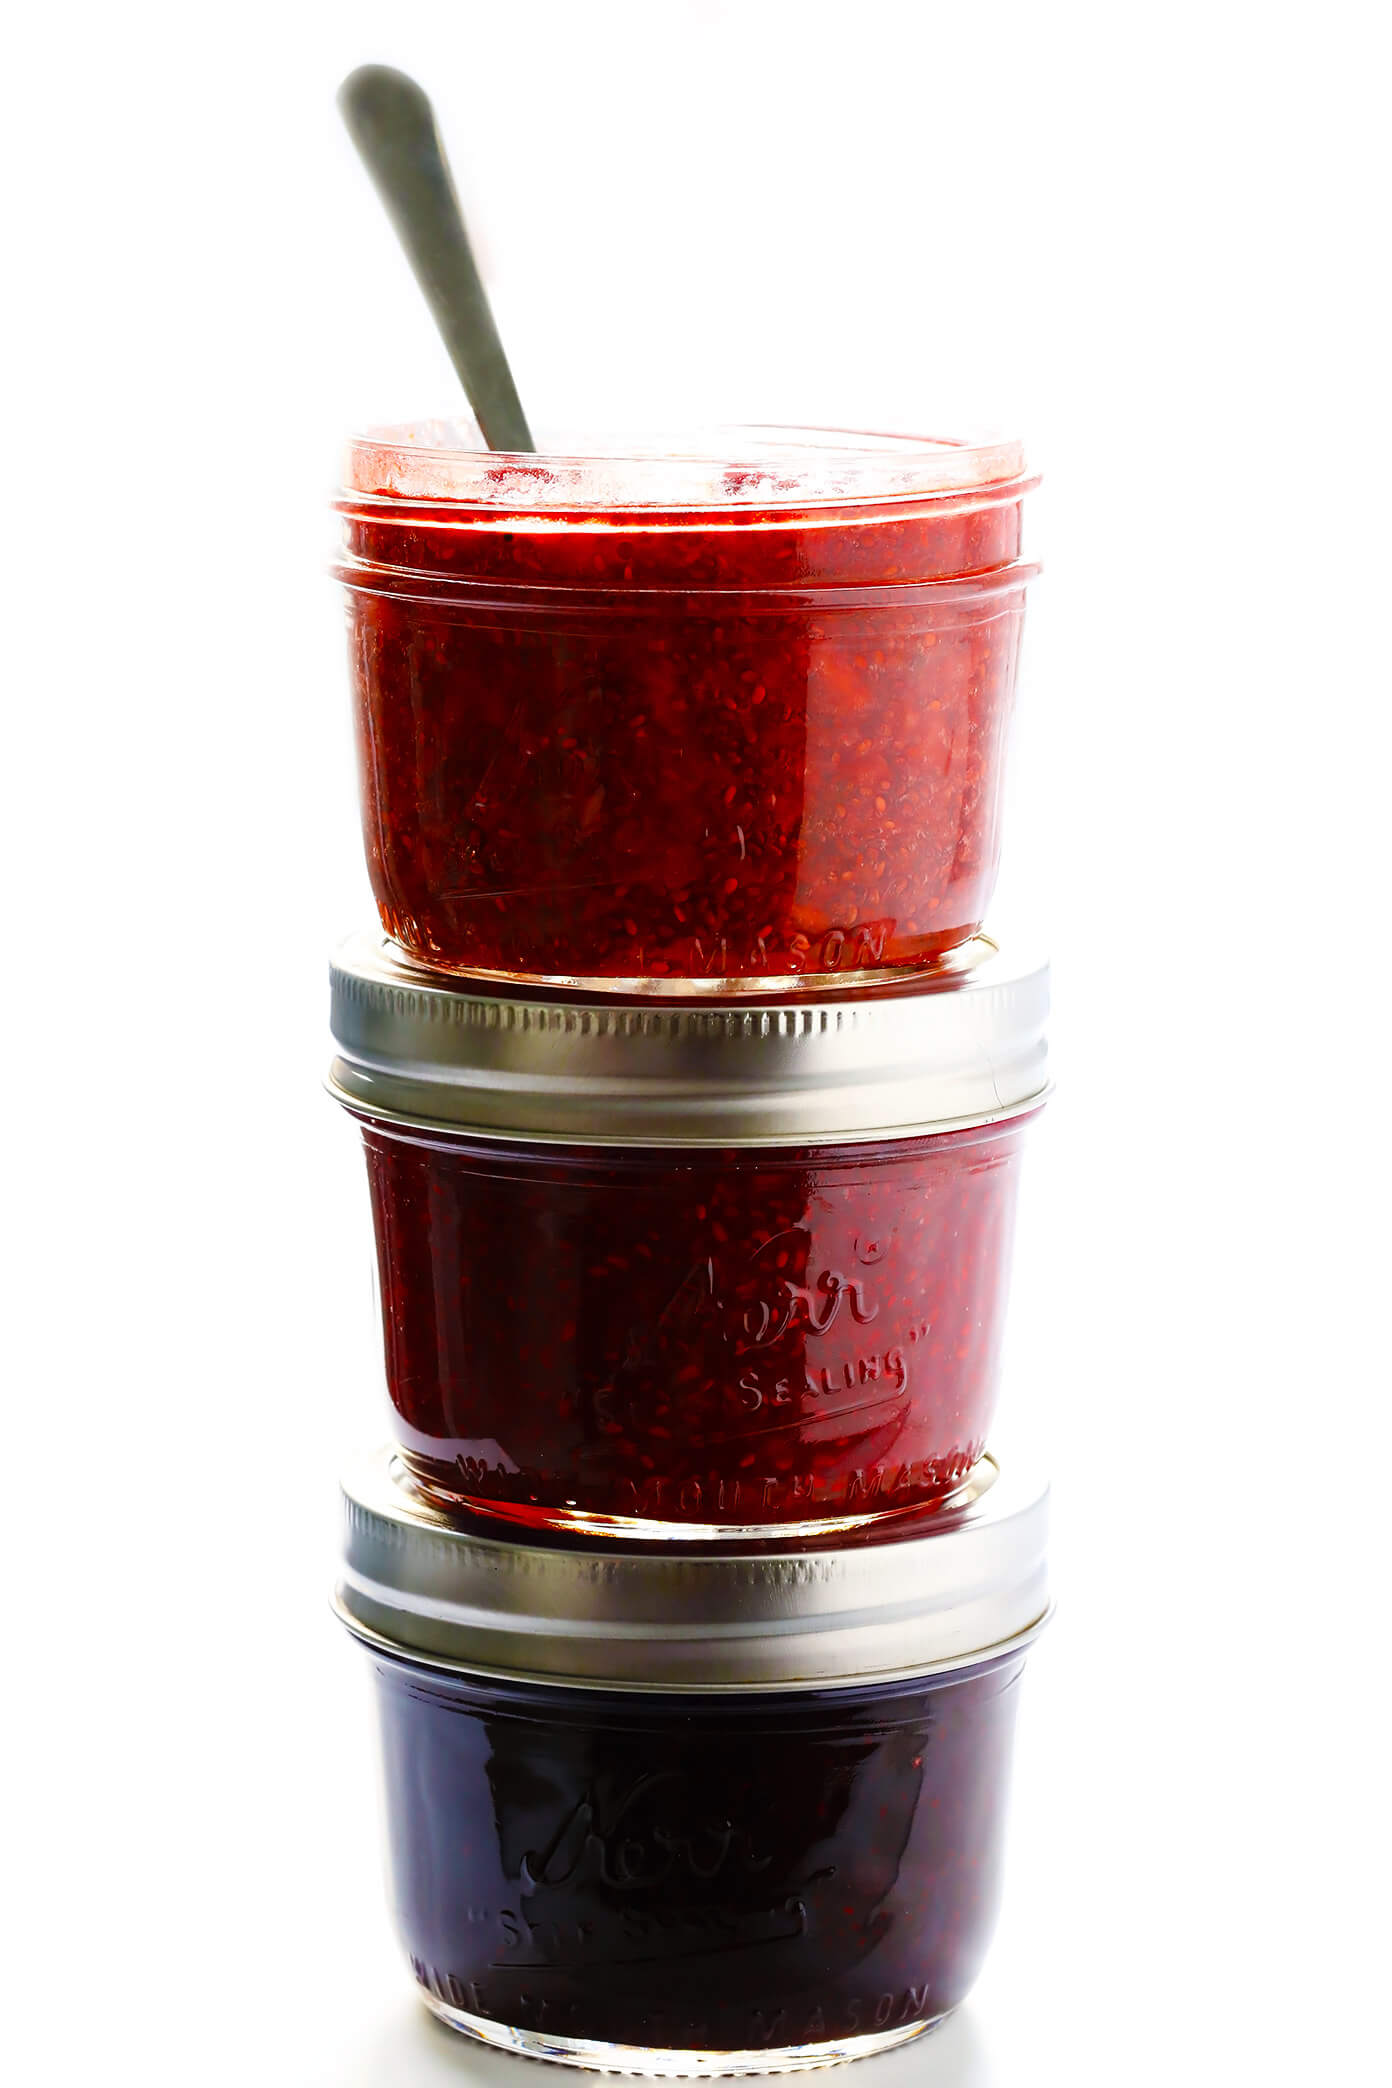 This 10-Minute Chia Seed Jam recipe is super easy to make, it's made with just 1 tablespoon of honey (instead of tons of added sugars!), it's perfect for breakfasts (toast, parfaits, etc.), sandwiches, cookies, and more, and it's SO delicious! Feel free to make it with your favorite juicy fruit (such as strawberry, blackberry, raspberry, peach, etc.). | Gimme Some Oven #chiajam #cleaneating #chiaseed #healthybreakfast